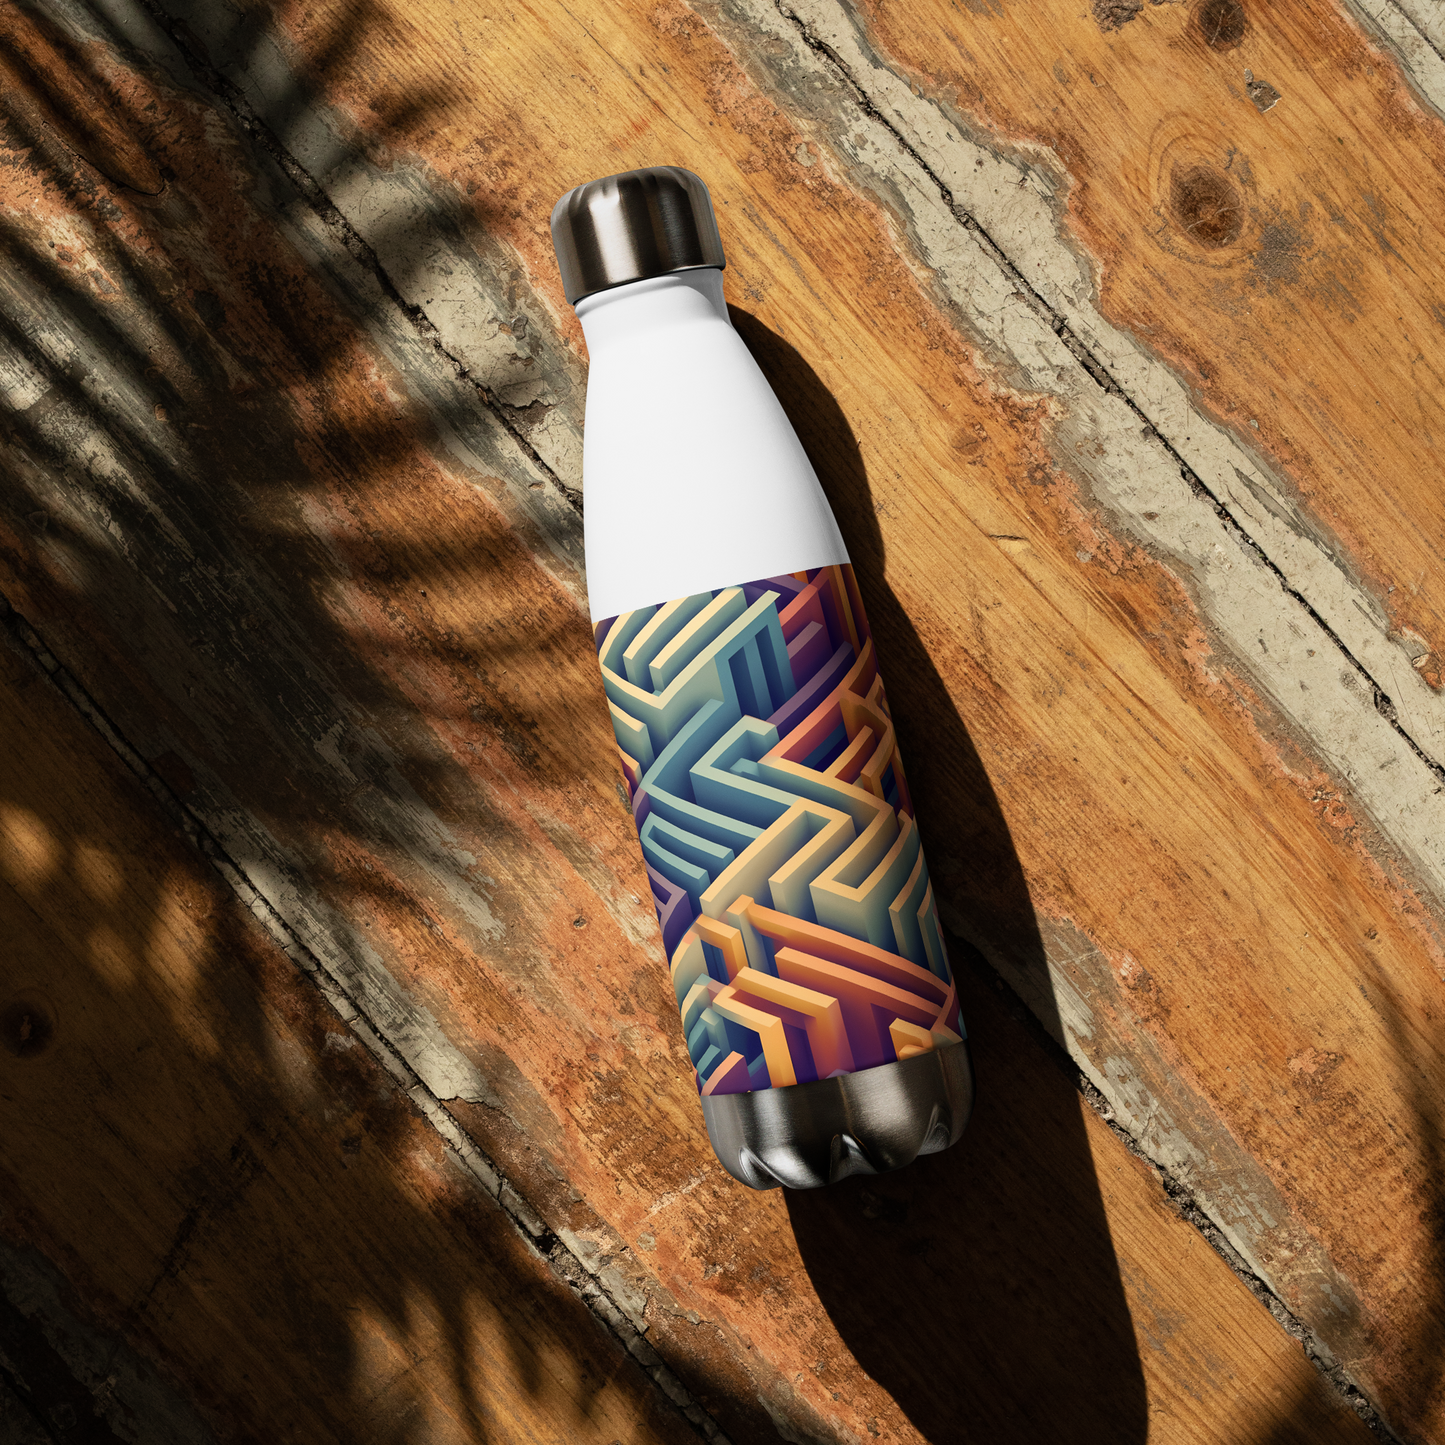 3D Maze Illusion | 3D Patterns | Stainless Steel Water Bottle - #3